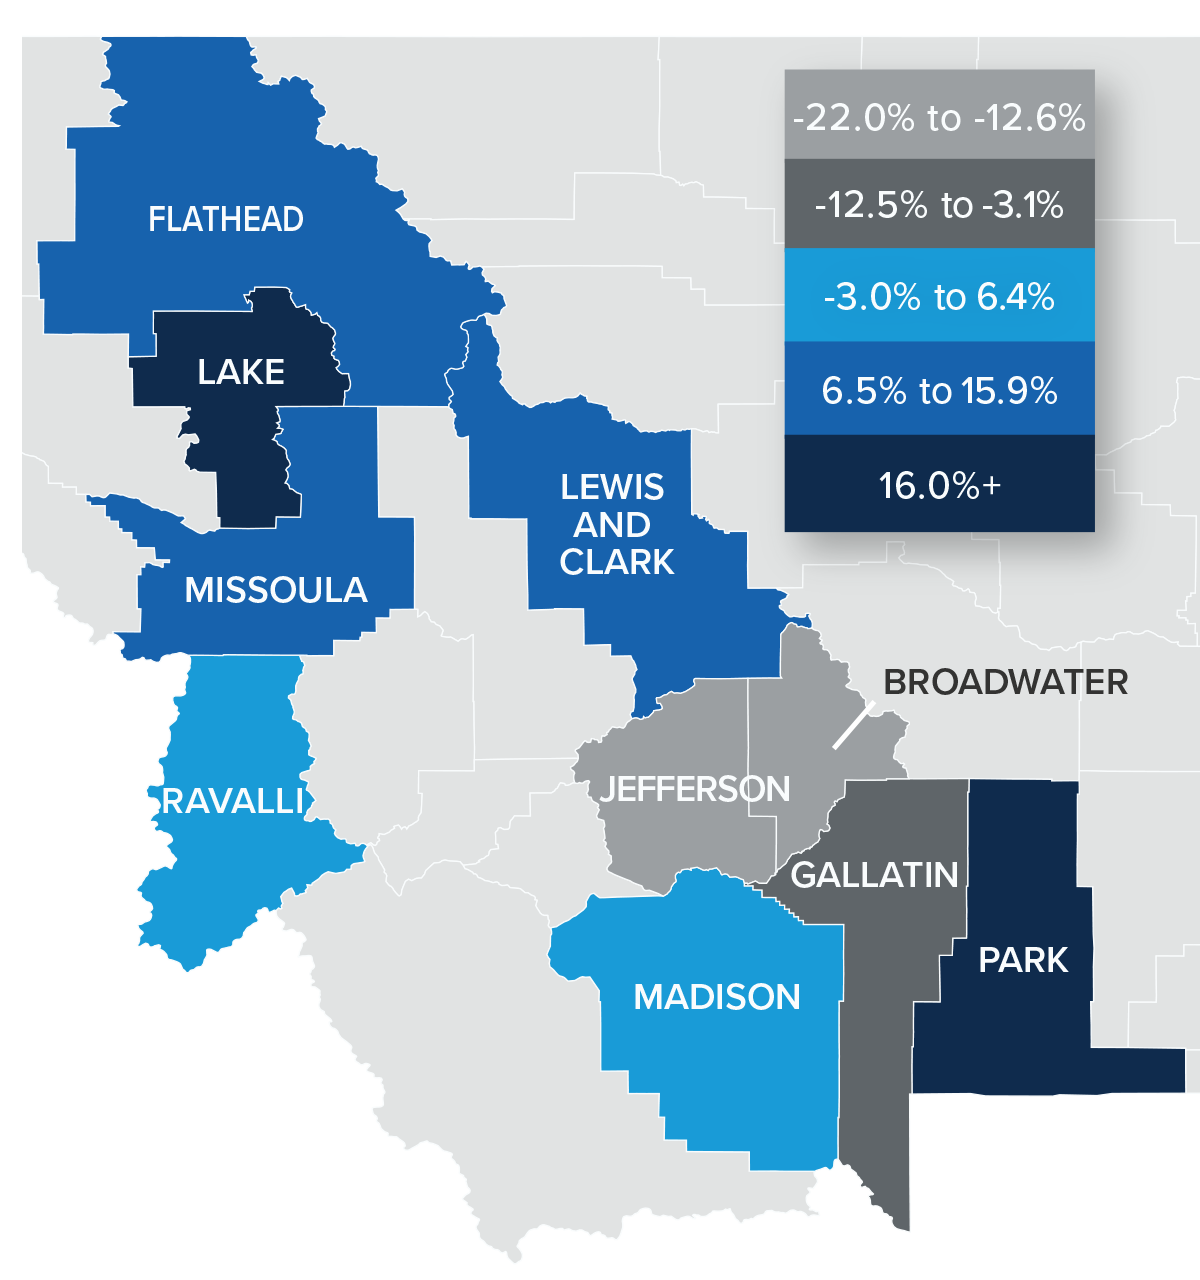 A map showing the real estate home prices percentage changes for various counties in Montana. Different colors correspond to different tiers of percentage change. Jefferson and Broadwater counties have a percentage change in the -22% to -12.6% range, Gallatin is in the -12.5% to -3.1% change range, Ravalli and Madison are in the -3% to 6.4% change range, Flathead, Lewis & Clark, and Missoula are in the 6.5% to 15.9% change range, and Park and Lake are in the 16%+ change range.